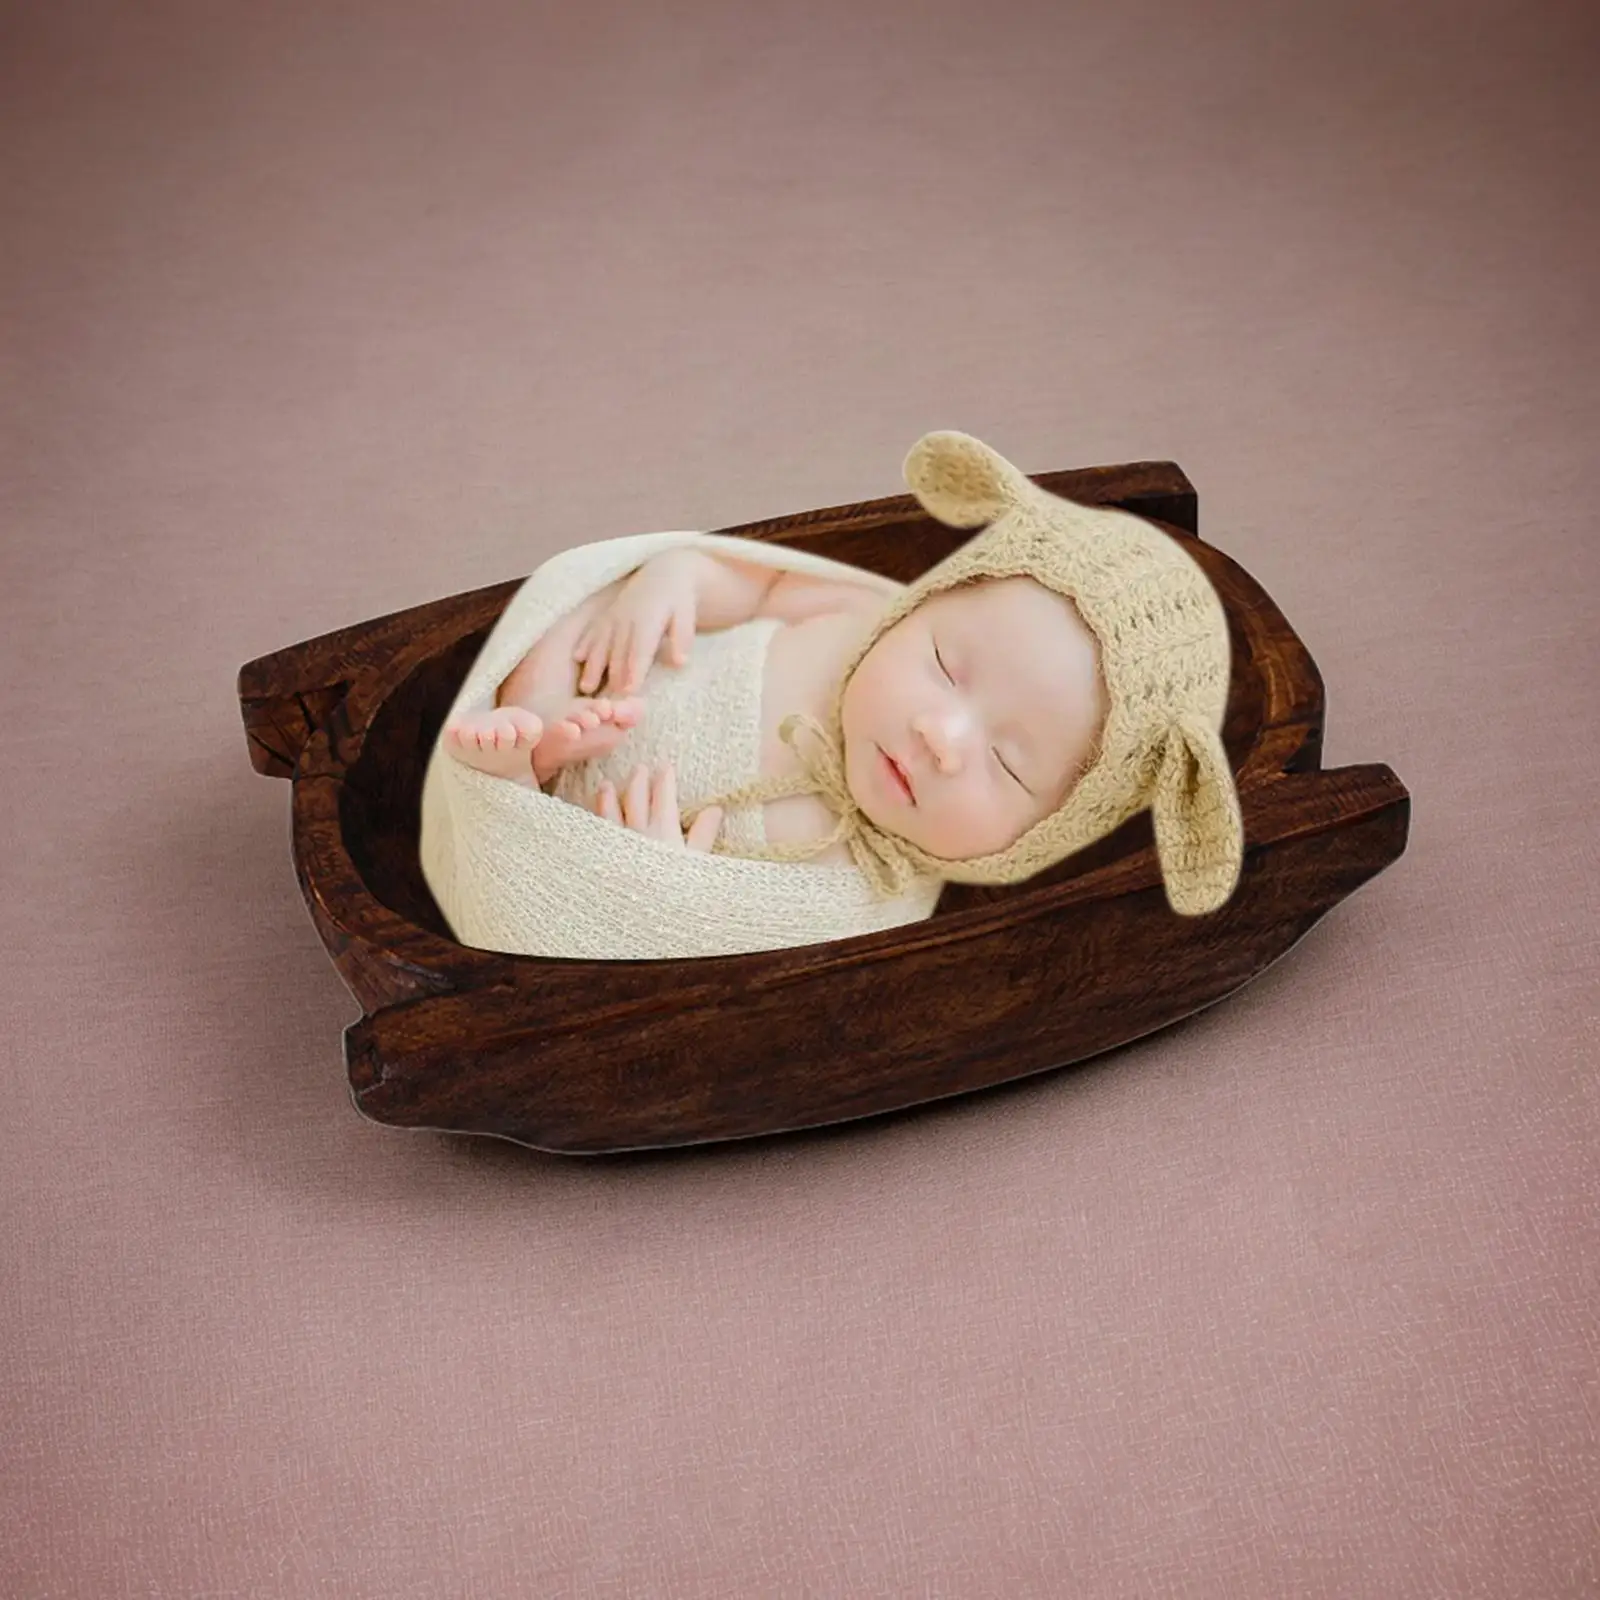 Newborn Photo Props Wood Bowl Home Decoration Accessory Small Couch Bed Baskets for Newborn Baby Girls Boys Baby Shower Birthday